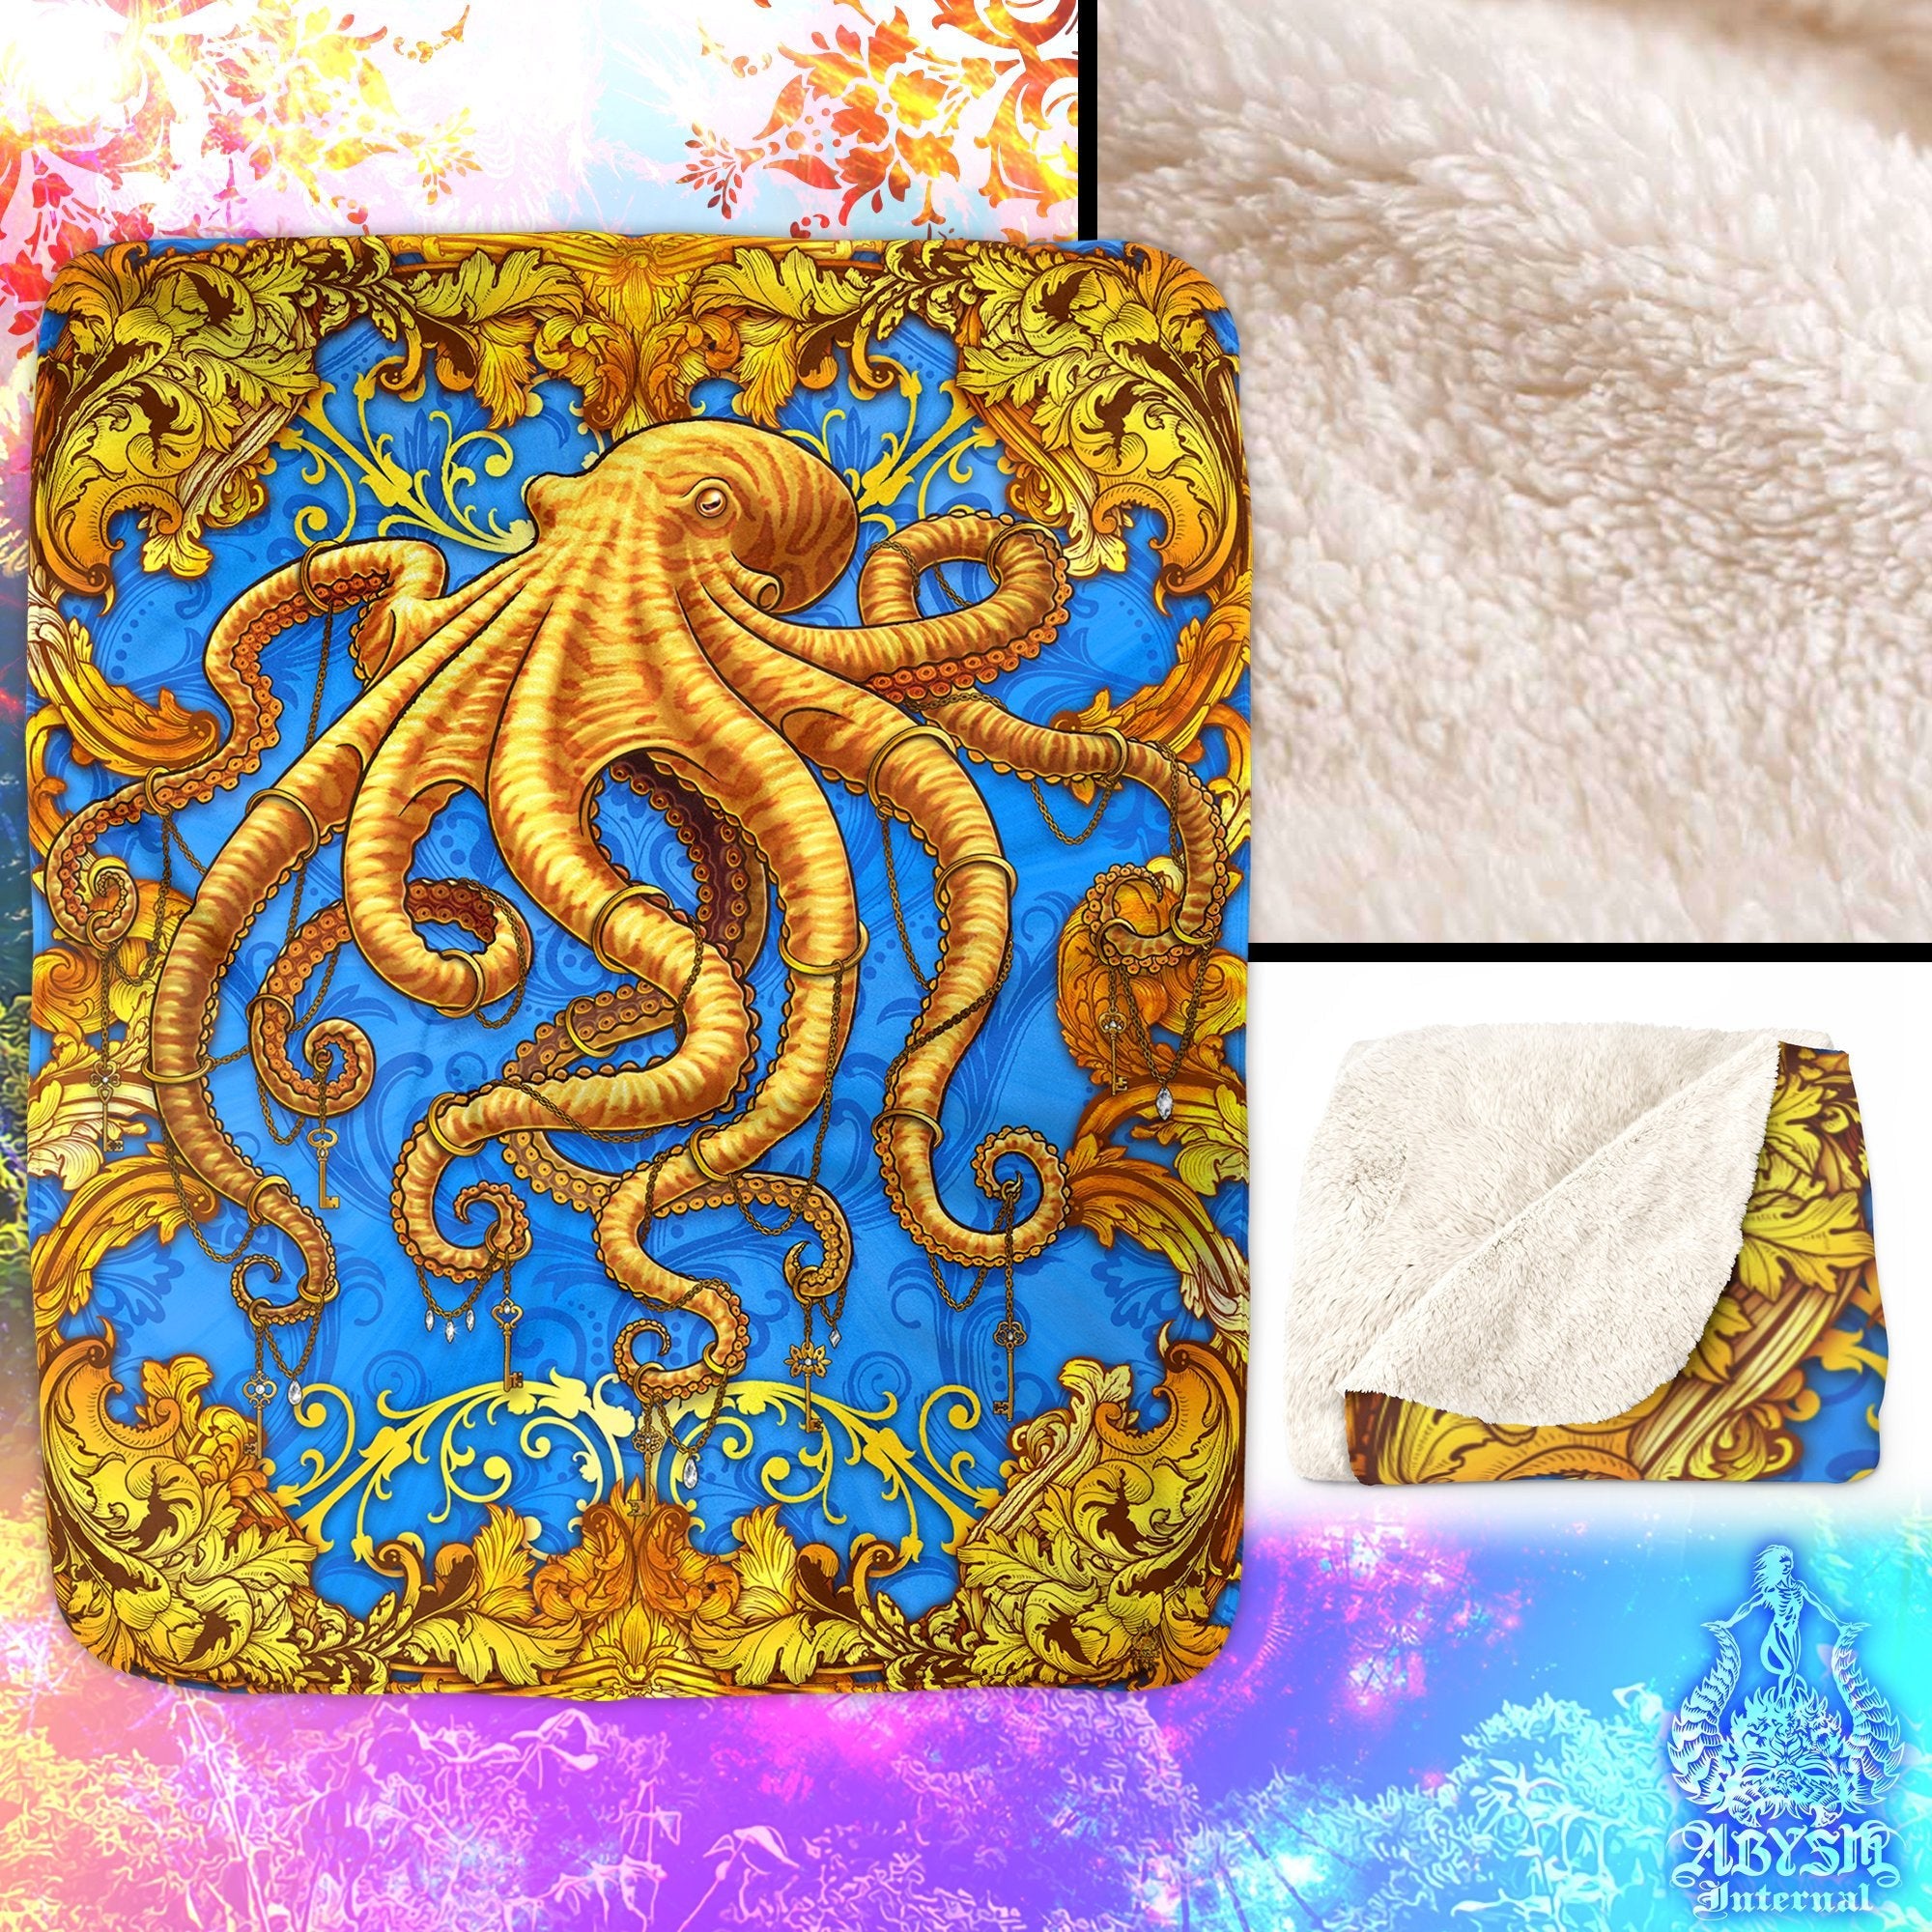 Octopus Throw Fleece Blanket, Coastal Decor, Eclectic and Funky Gift - Cyan & Gold - Abysm Internal